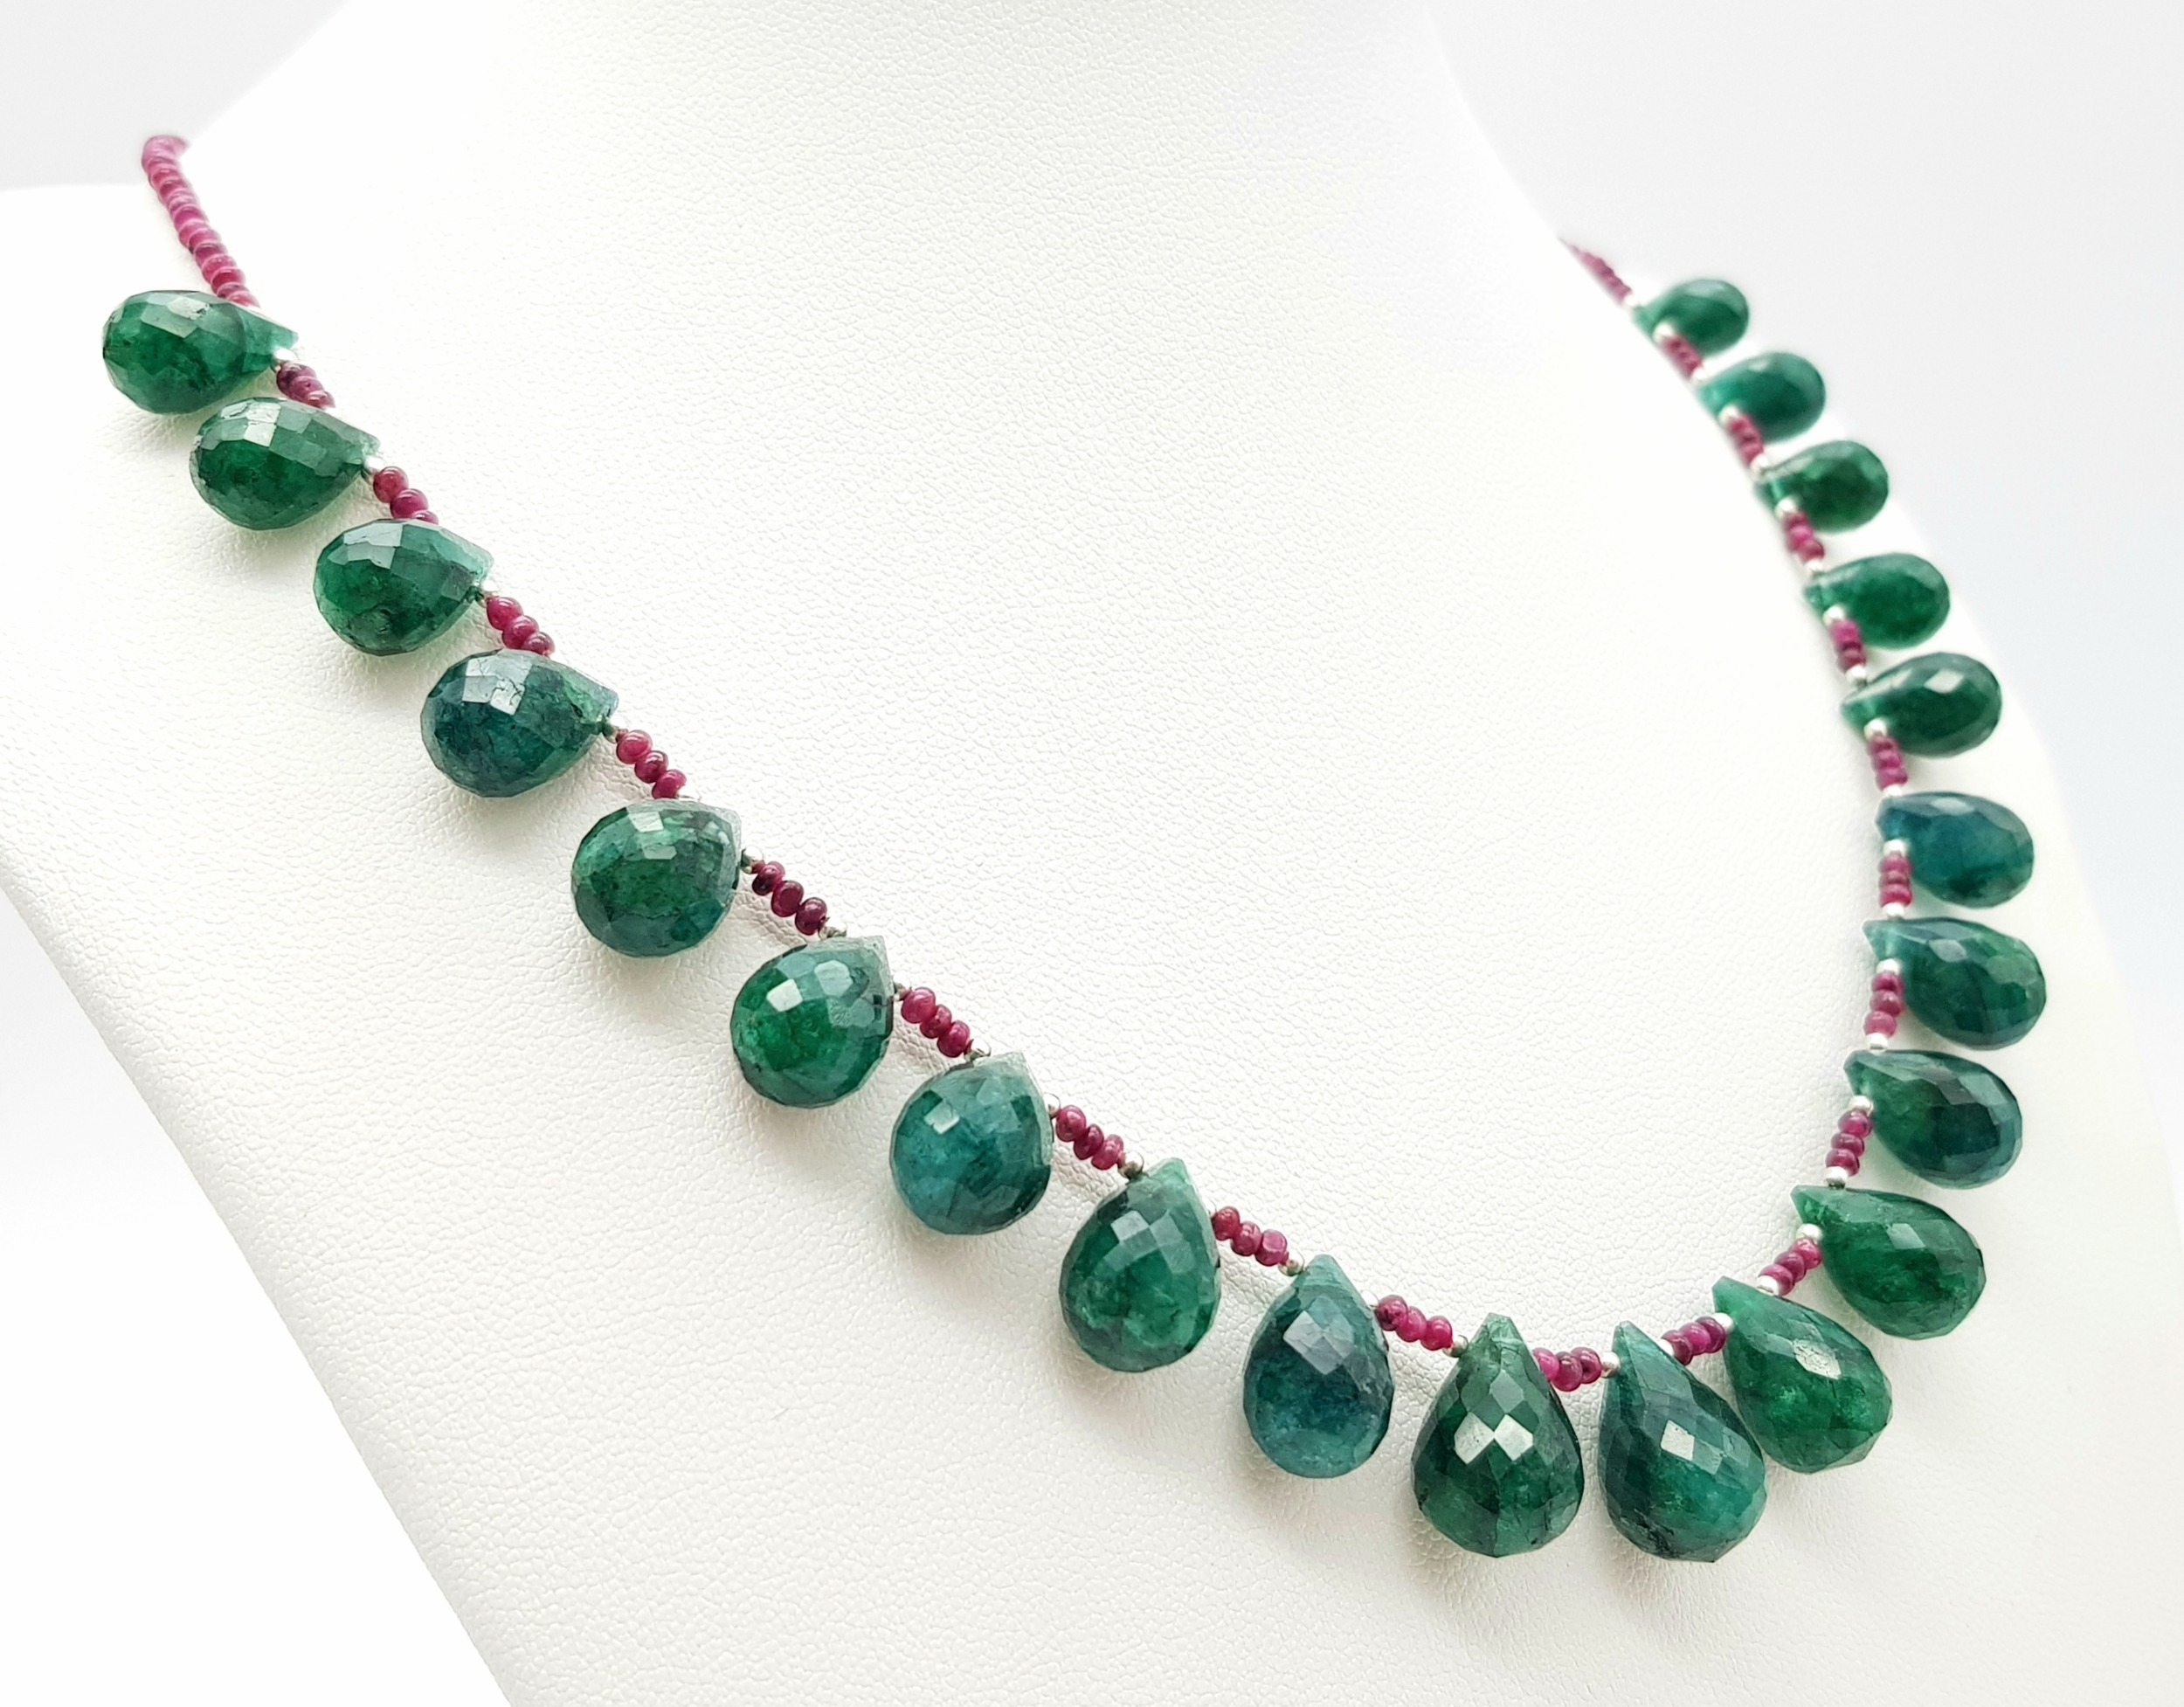 A 160ctw Emerald Teardrop Necklace with Ruby Spacer Beads And a Pair Matching Drop Earrings. 44cm - Image 3 of 5